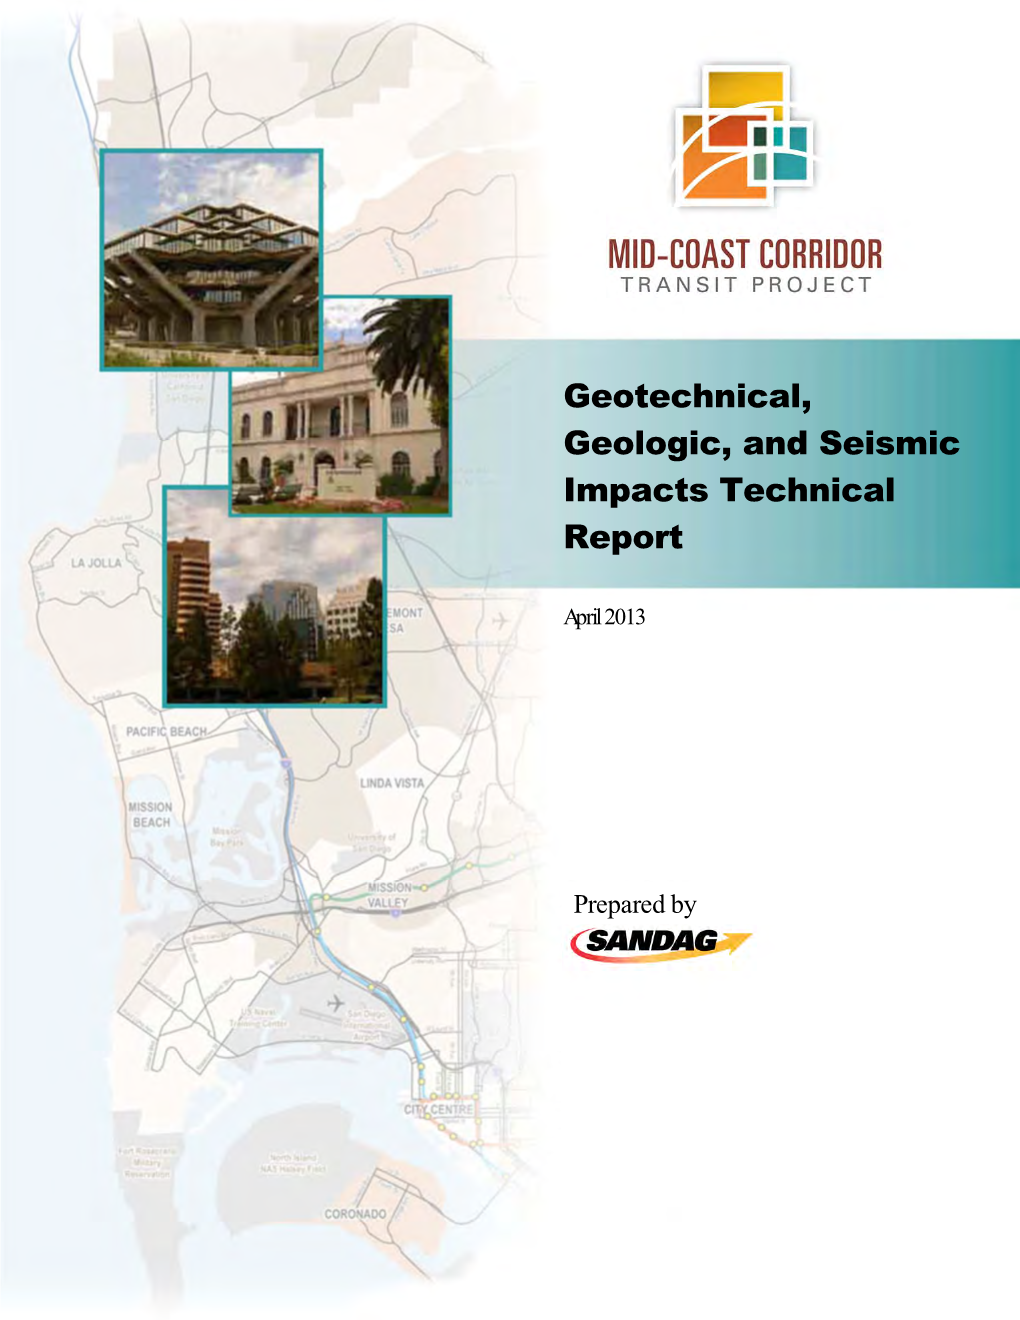 Geotechnical, Geologic, and Seismic Impacts Technical Report